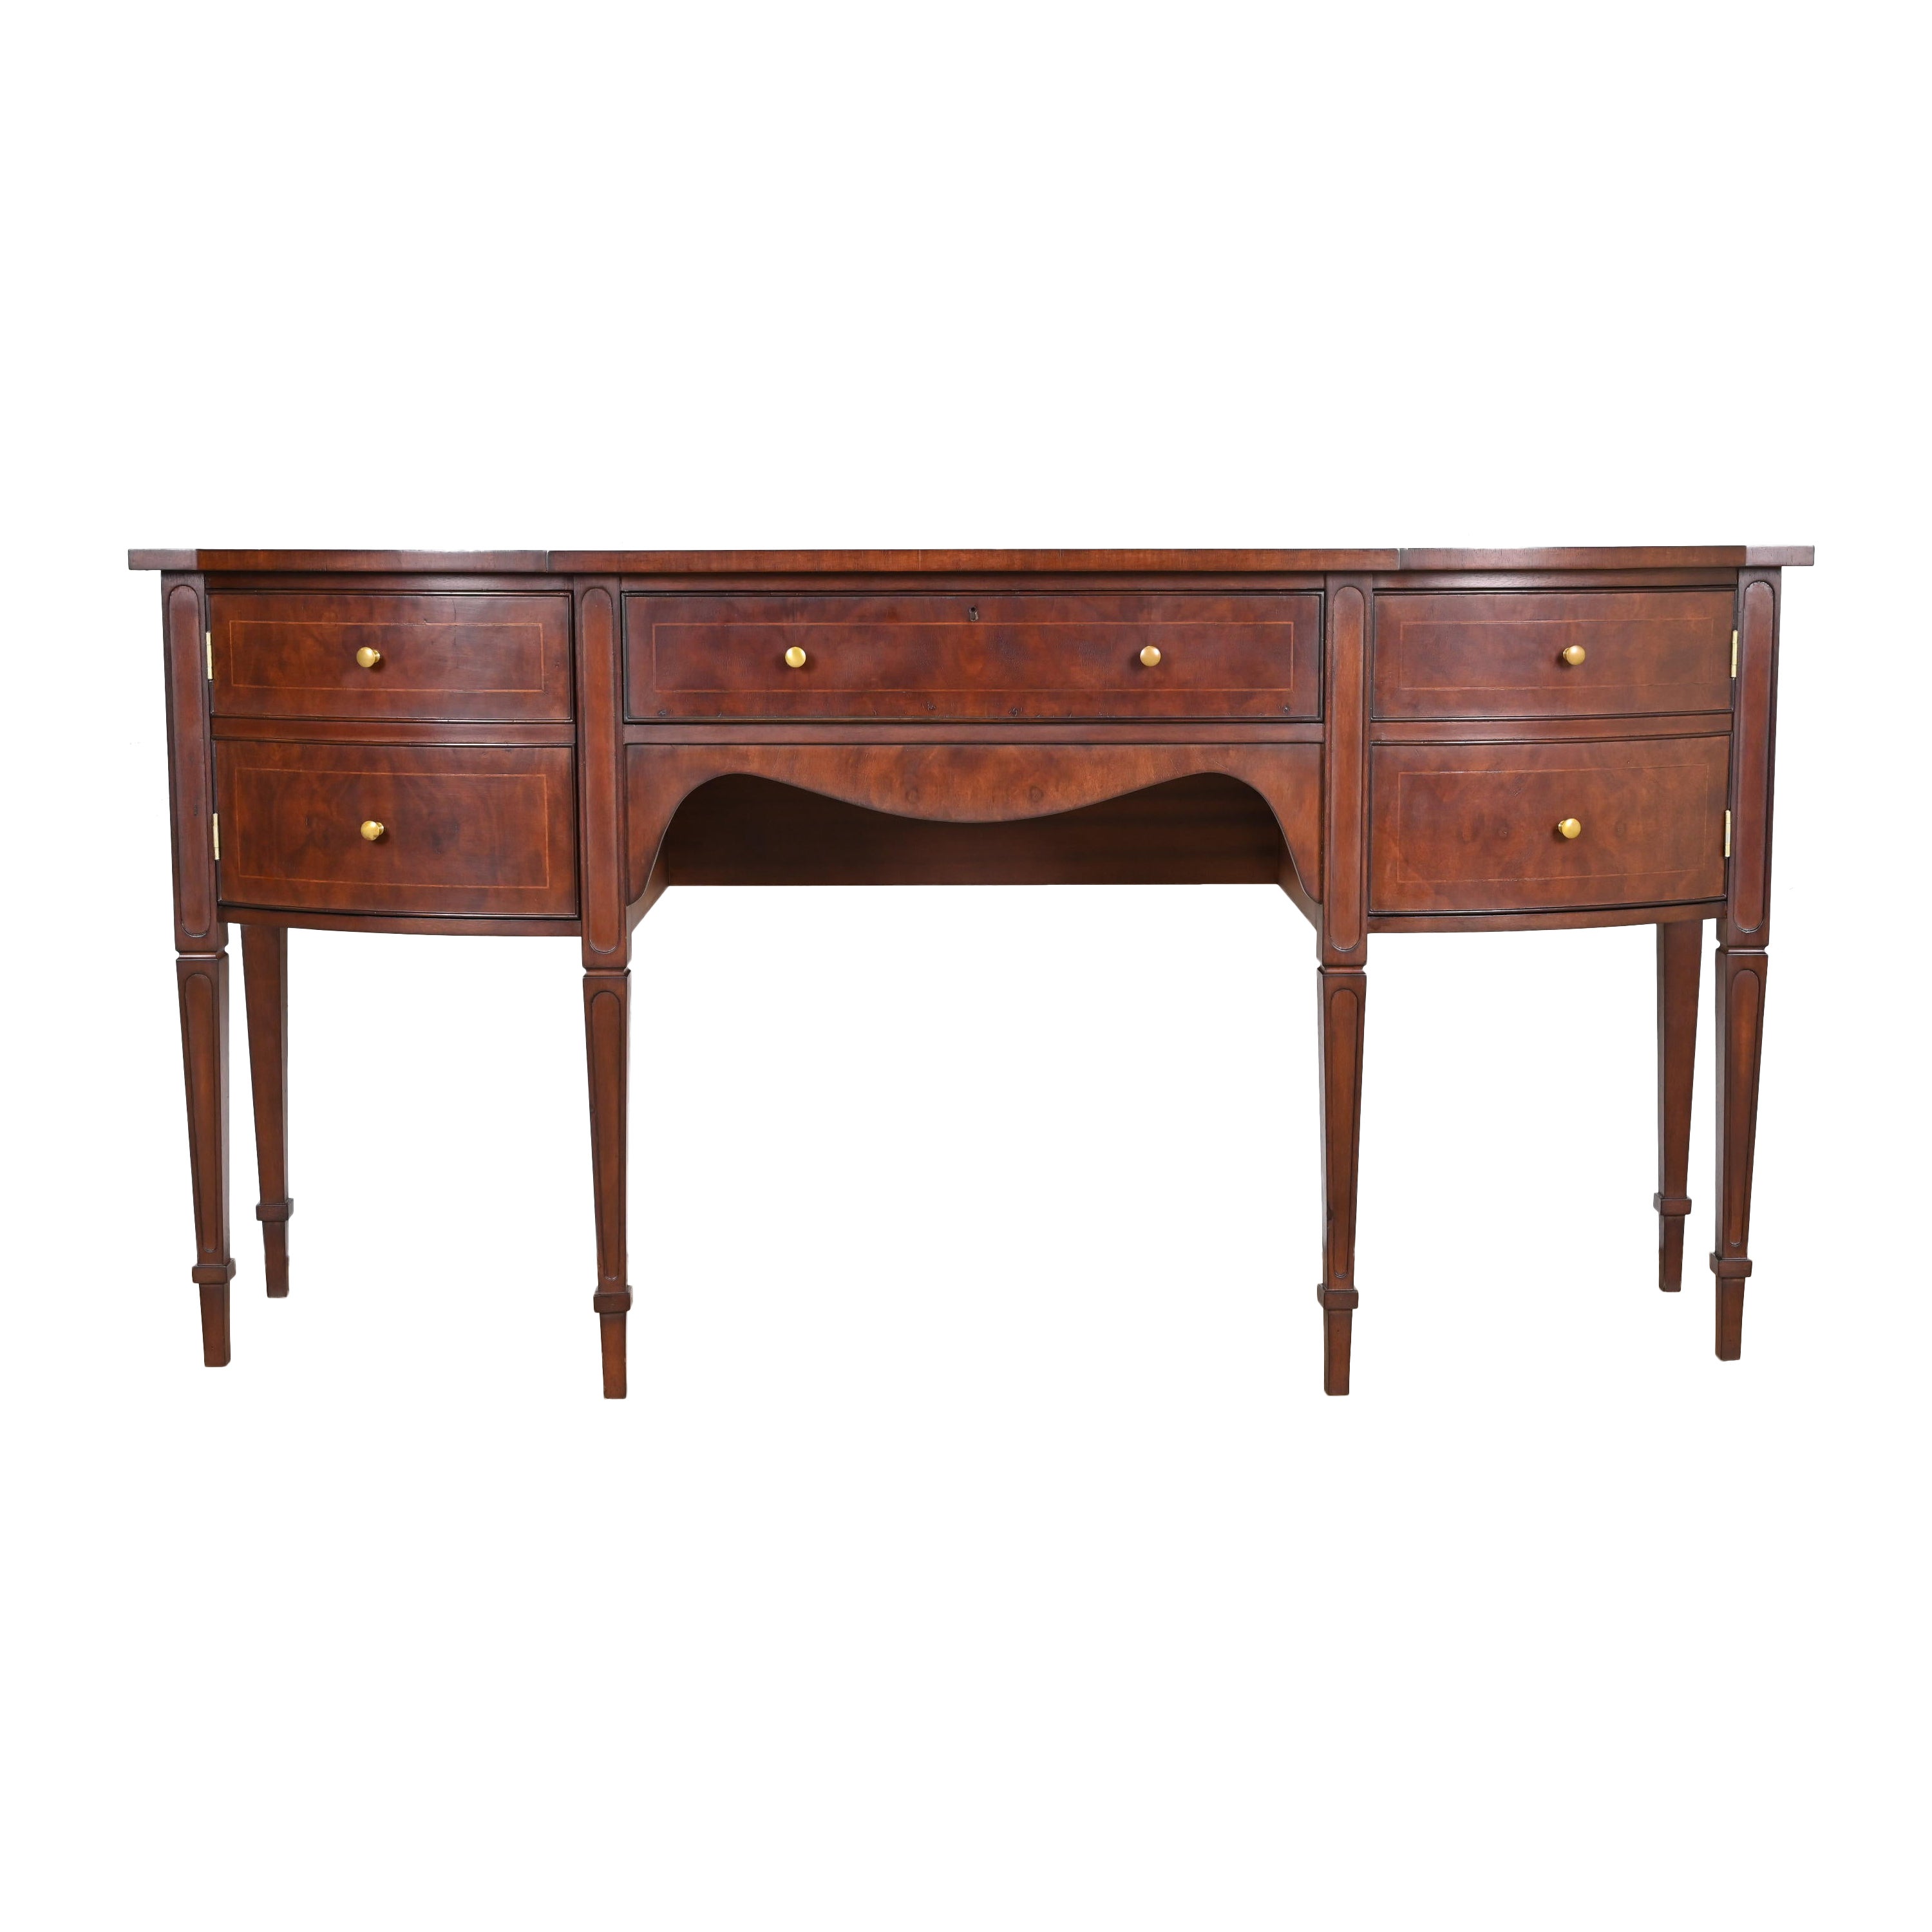 Baker Furniture Style Federal Inlaid Mahogany Sideboard Credenza